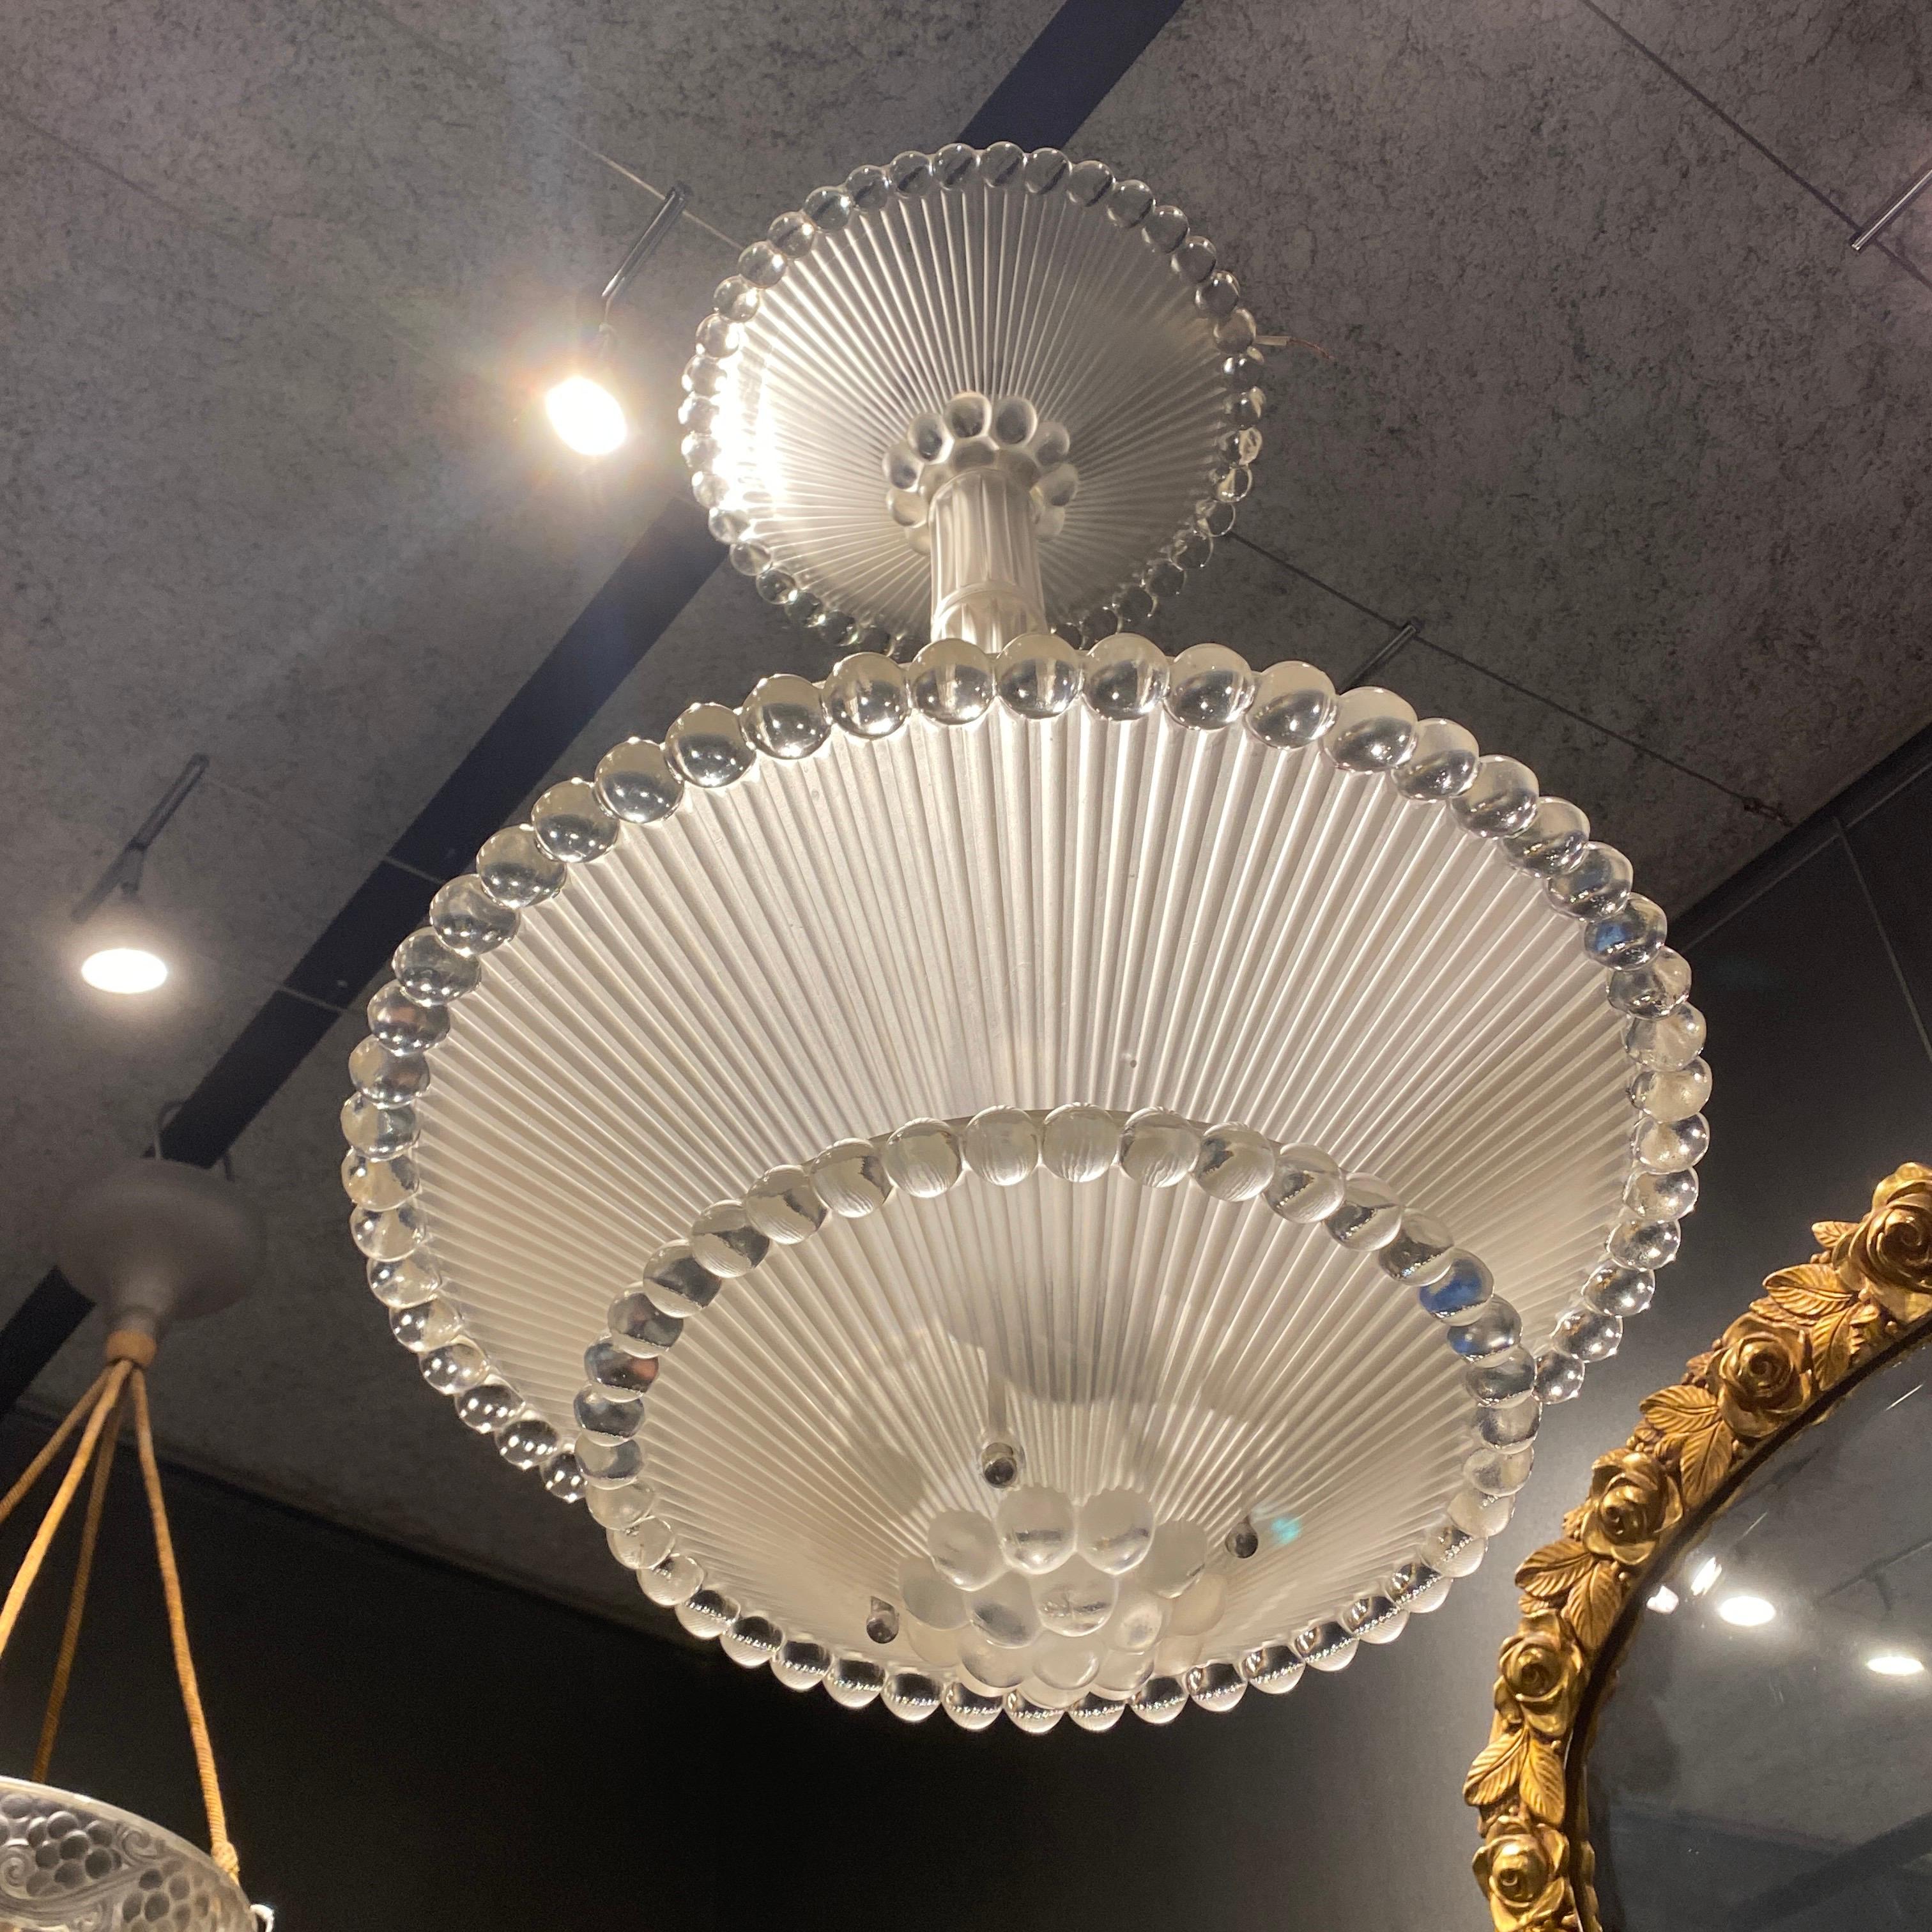 The perles glass chandelier is made by R.Lalique en white glass in 1931.

It is consisting of 3 different glass bowl, plus a glass central tube.

The signature is molded and sand blasted block letters.

The electrification has been redone, the